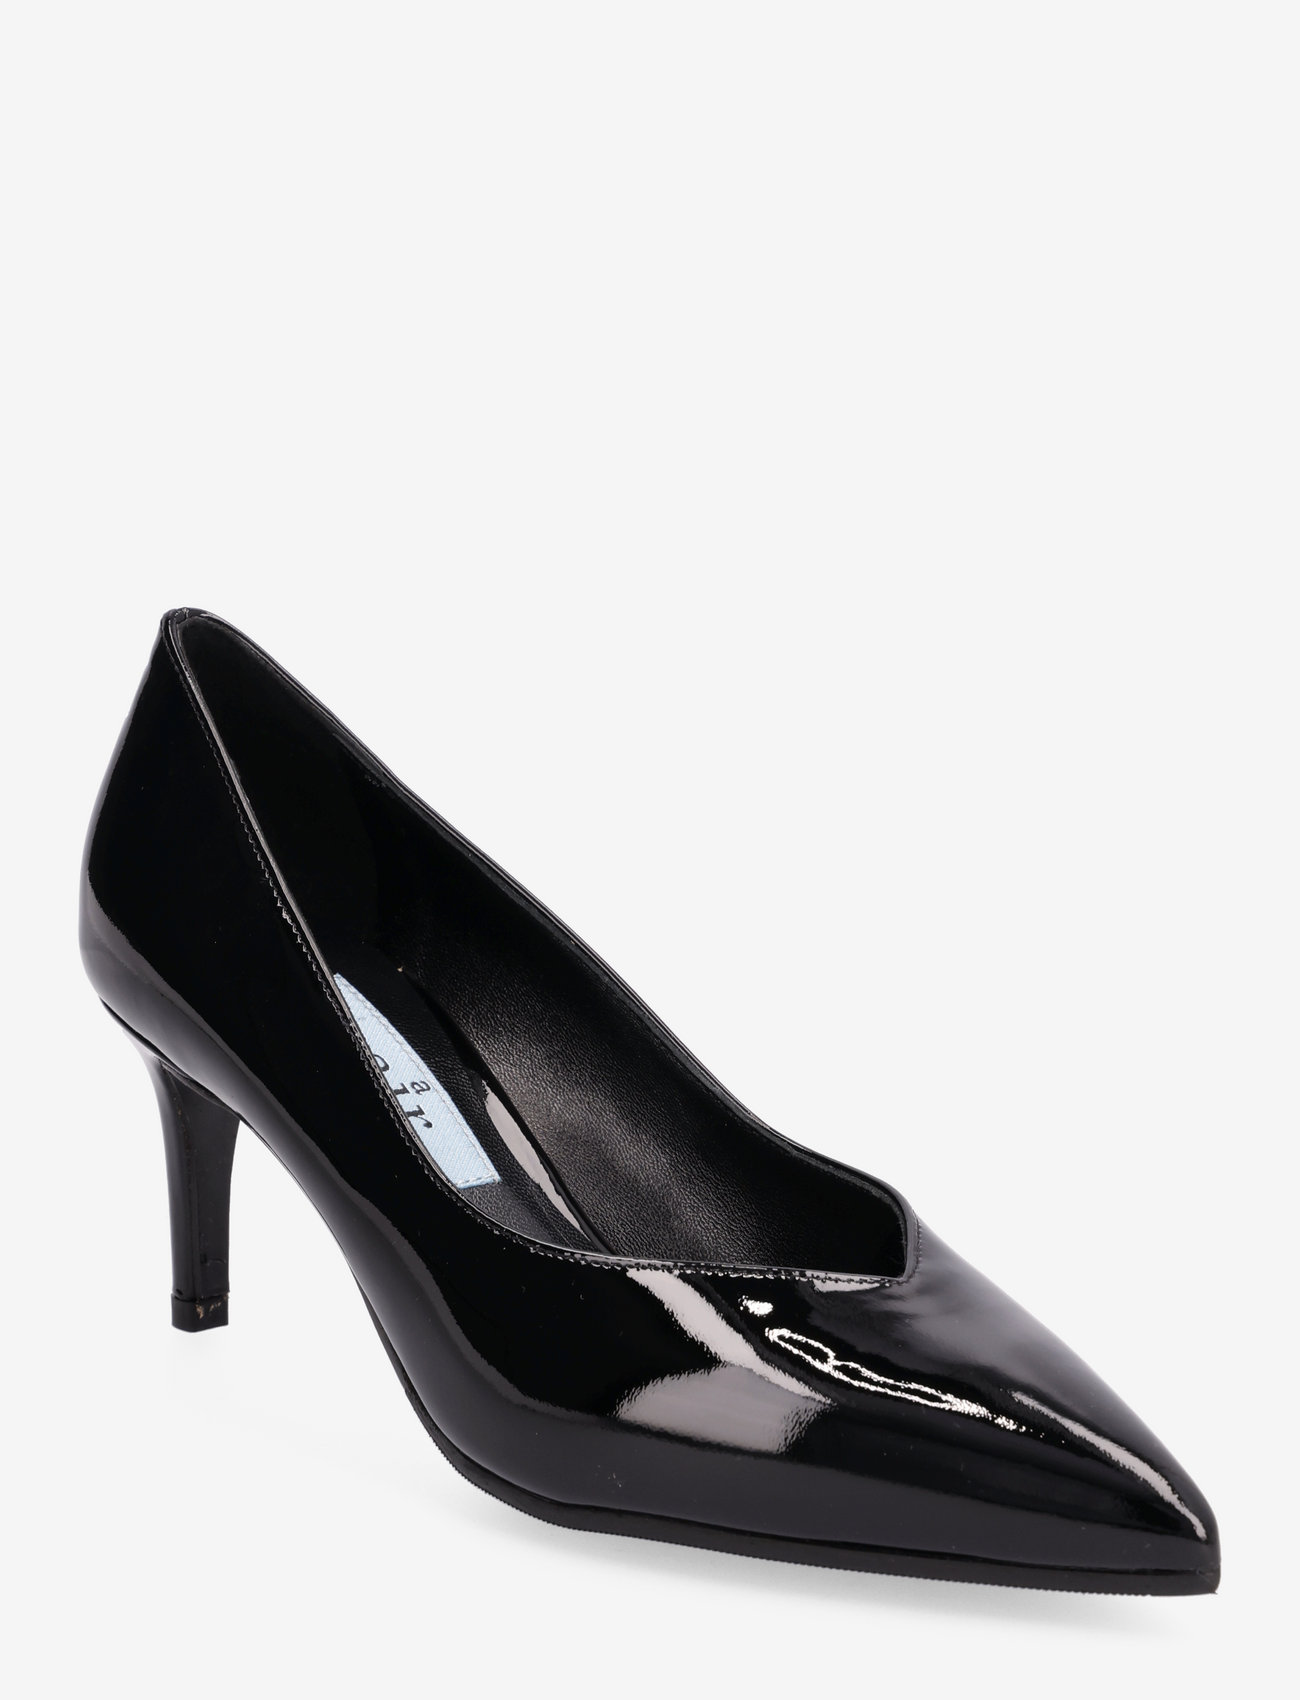 Apair - Low heel stilletto - party wear at outlet prices - nero - 0